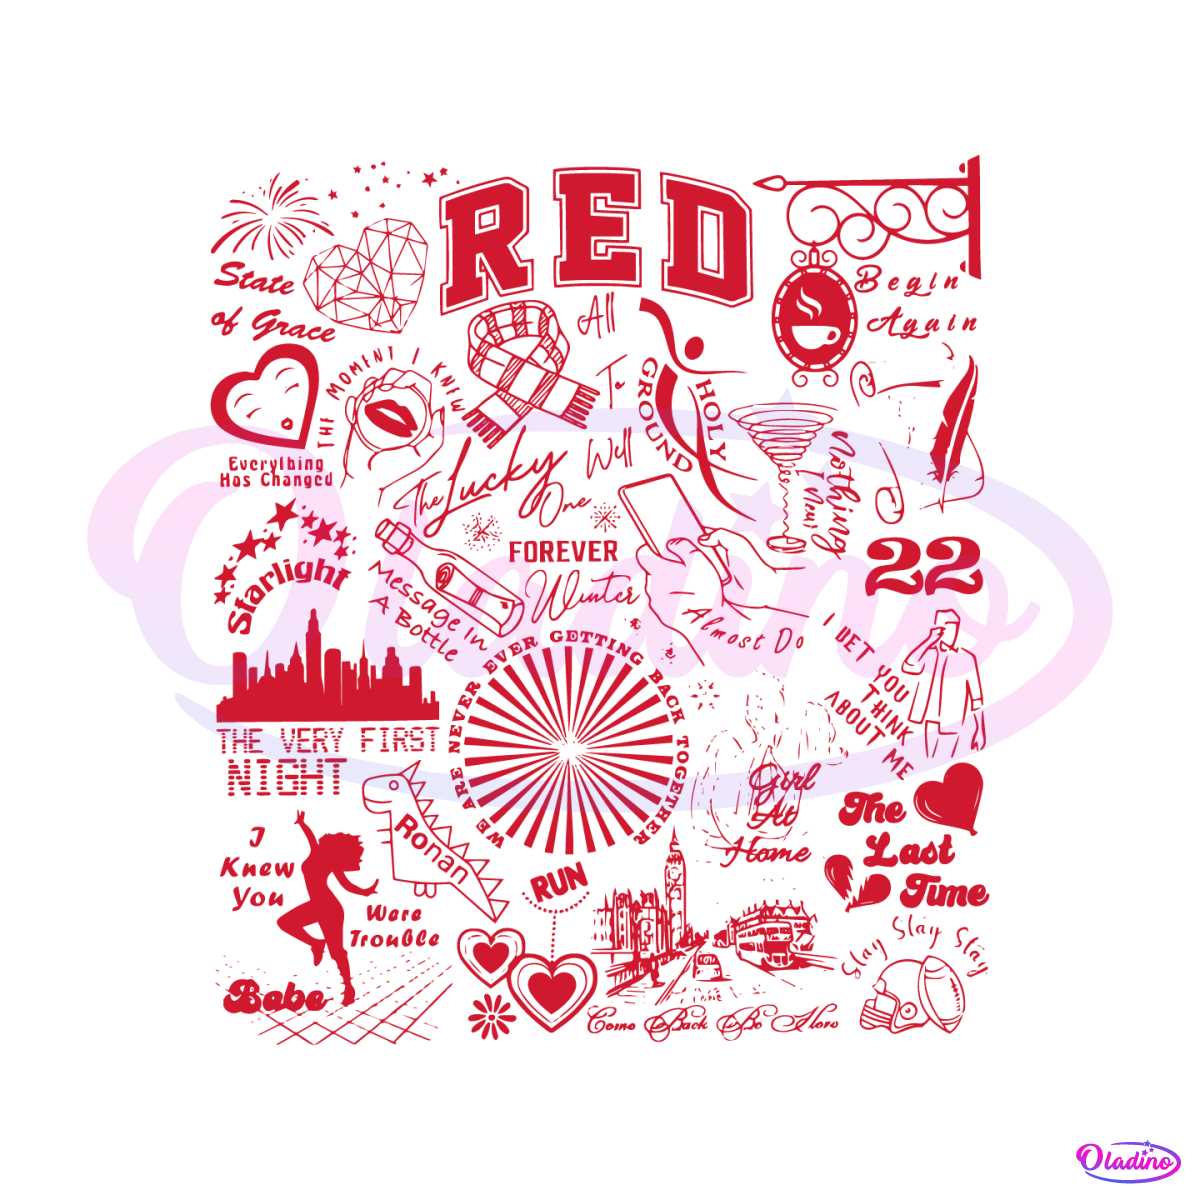 red-all-too-well-taylor-swift-song-tracklist-svg-cutting-files